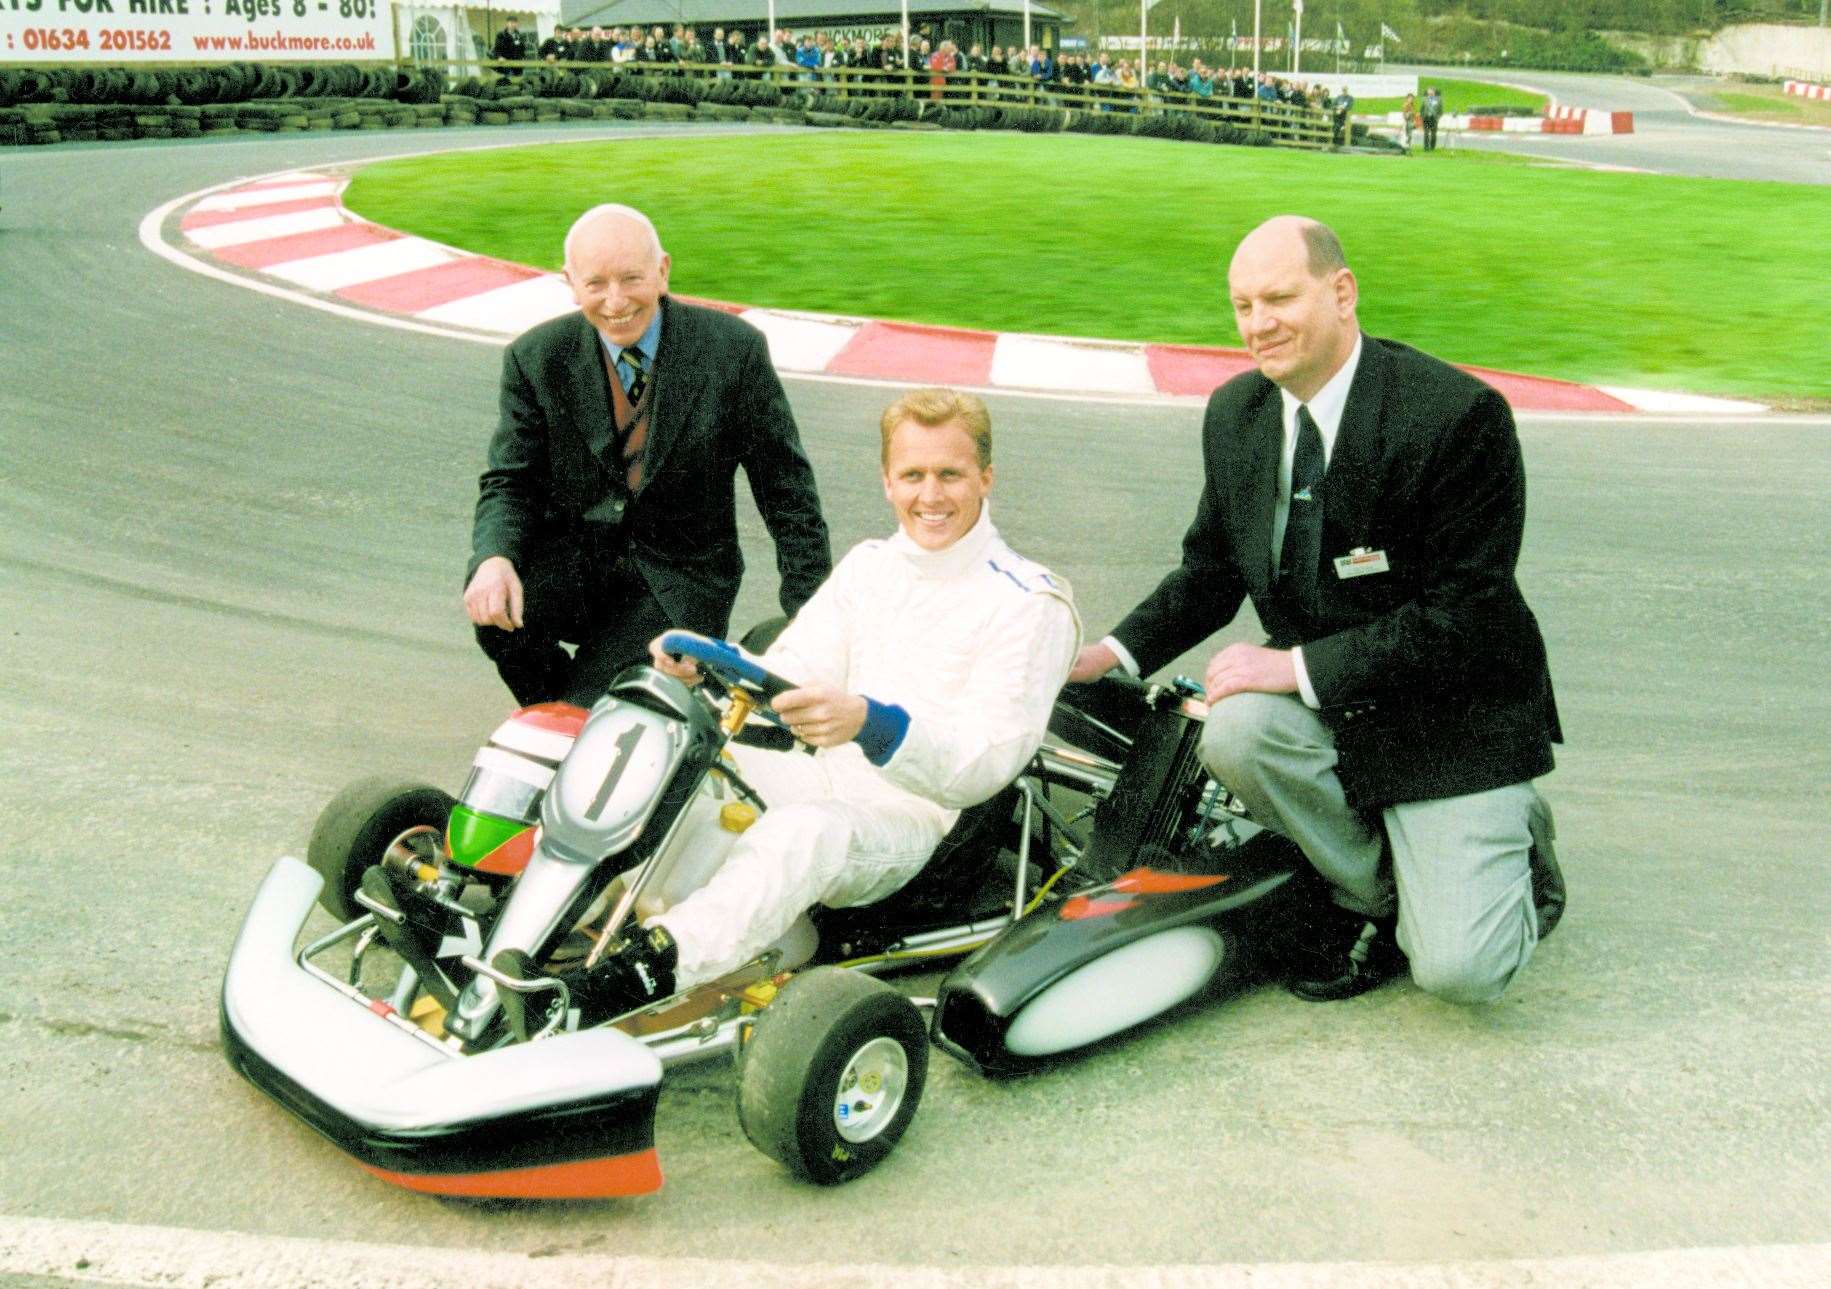 Bill Sisley, right, pictured with John Surtees and Johnny Herbert at Buckmore Park, says Brise had the talent to get to the top